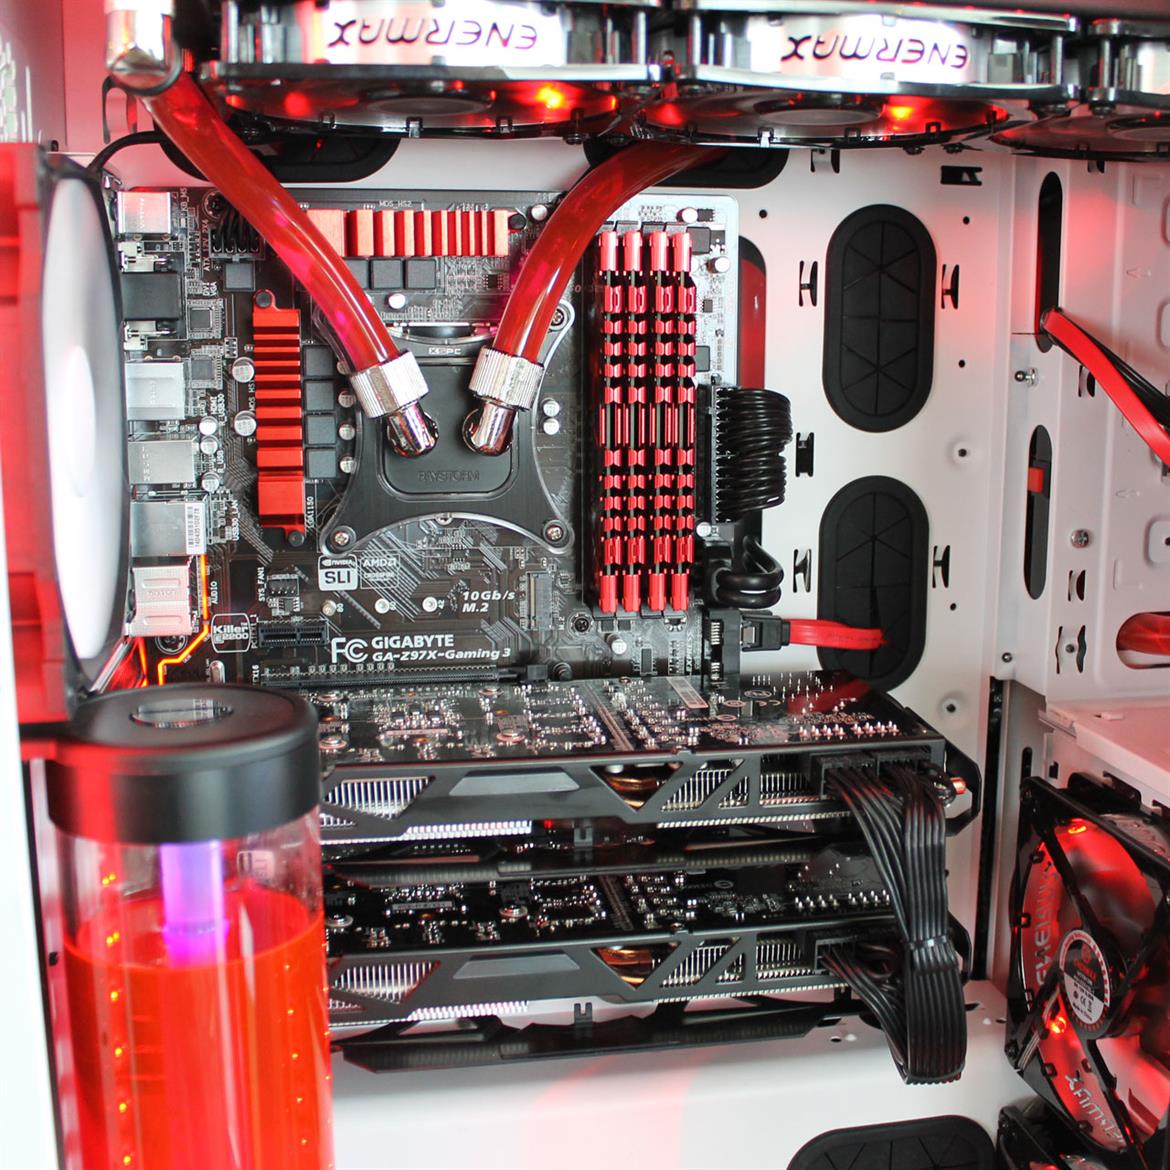 Gigabyte Previews New Intel-Based Motherboards For Gamers, Overclockers, and the Rest of Us